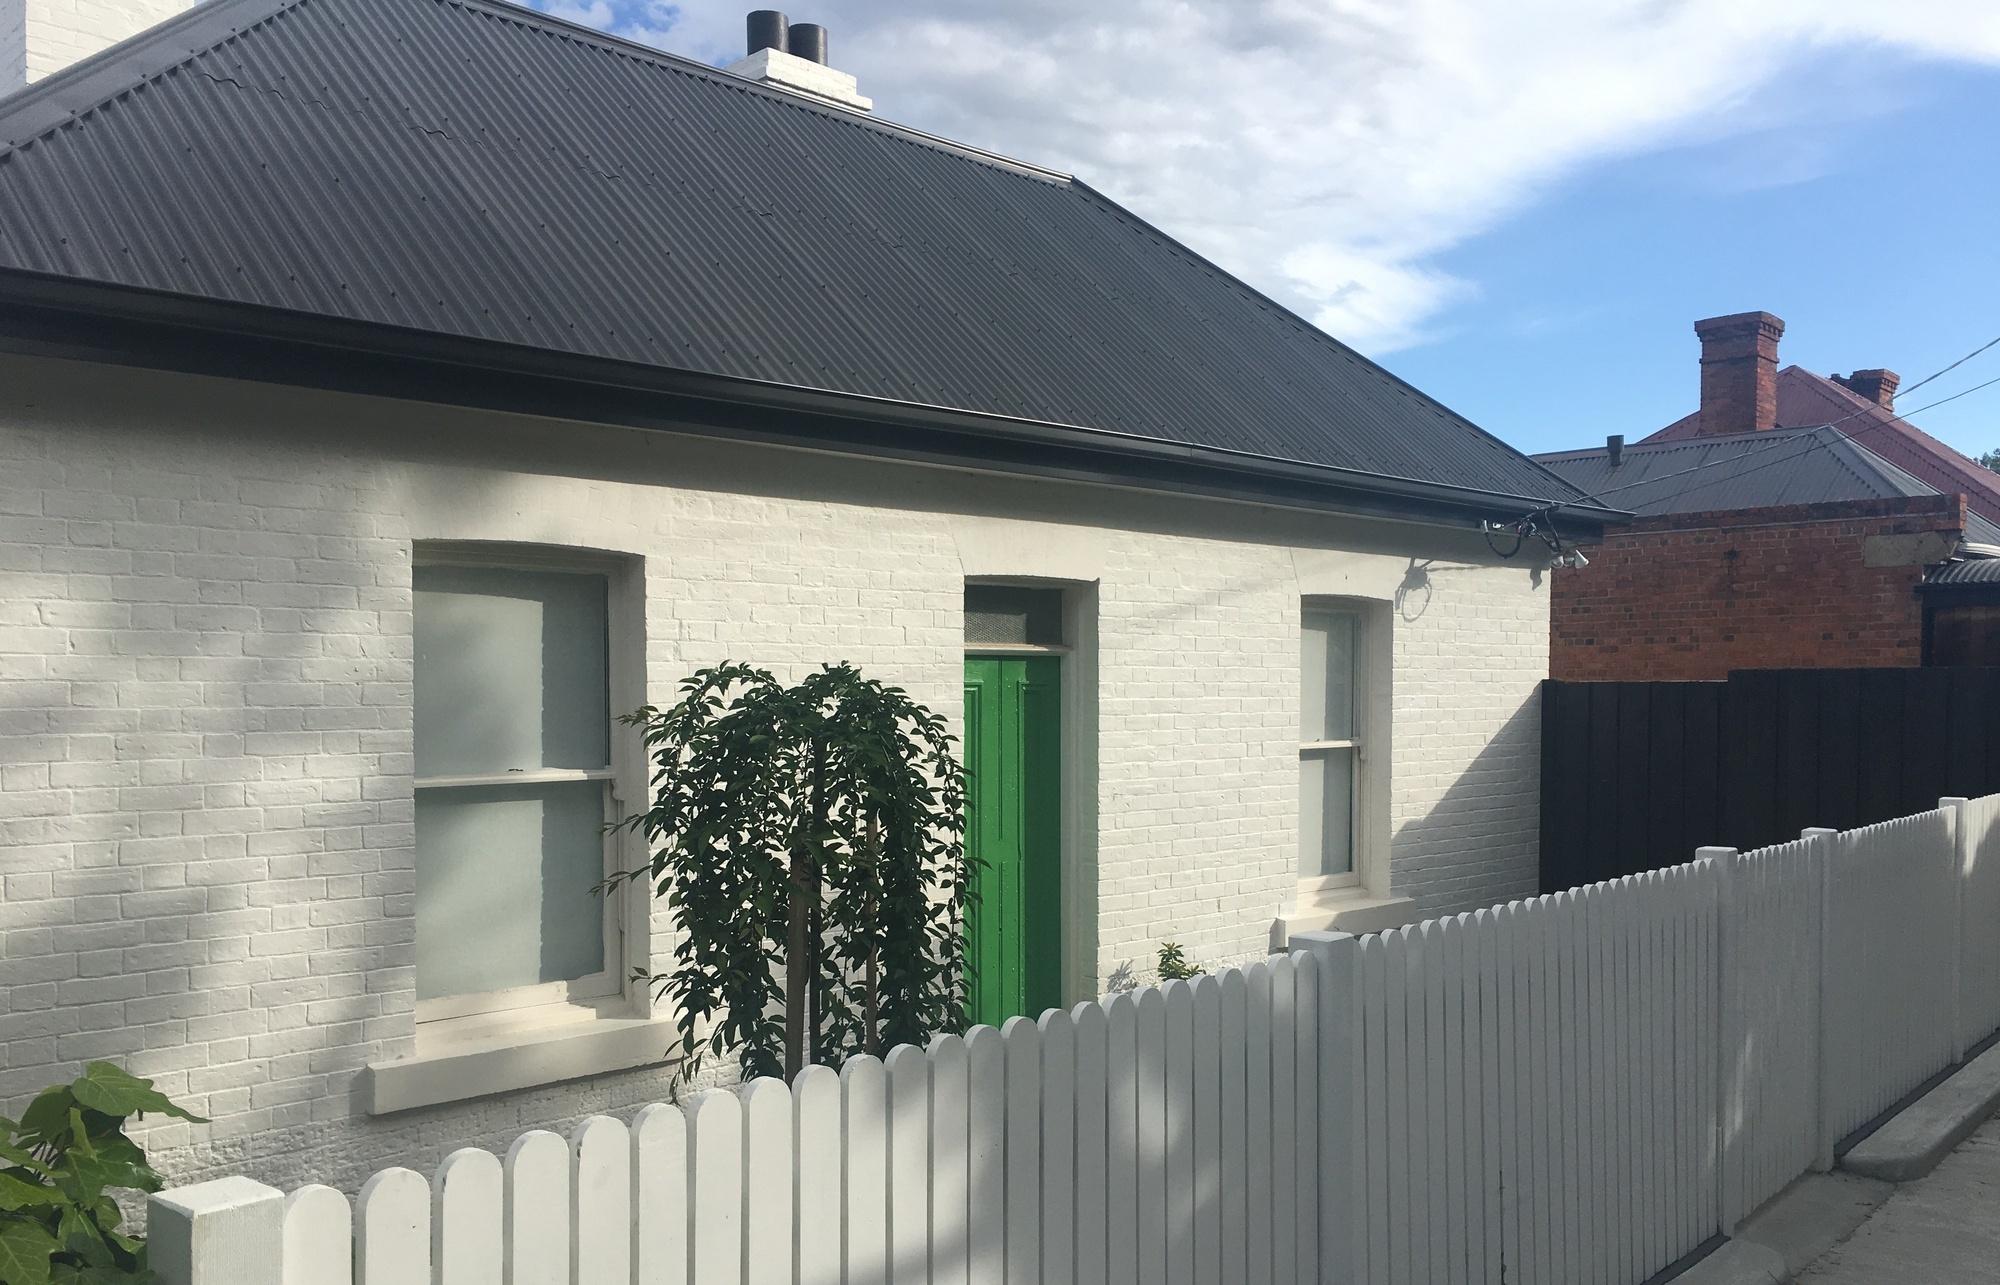 Georgia from South Hobart, TAS loves Roofing, Guttering & Fascia made from COLORBOND® steel in colour Monument® for this cottage renovation.